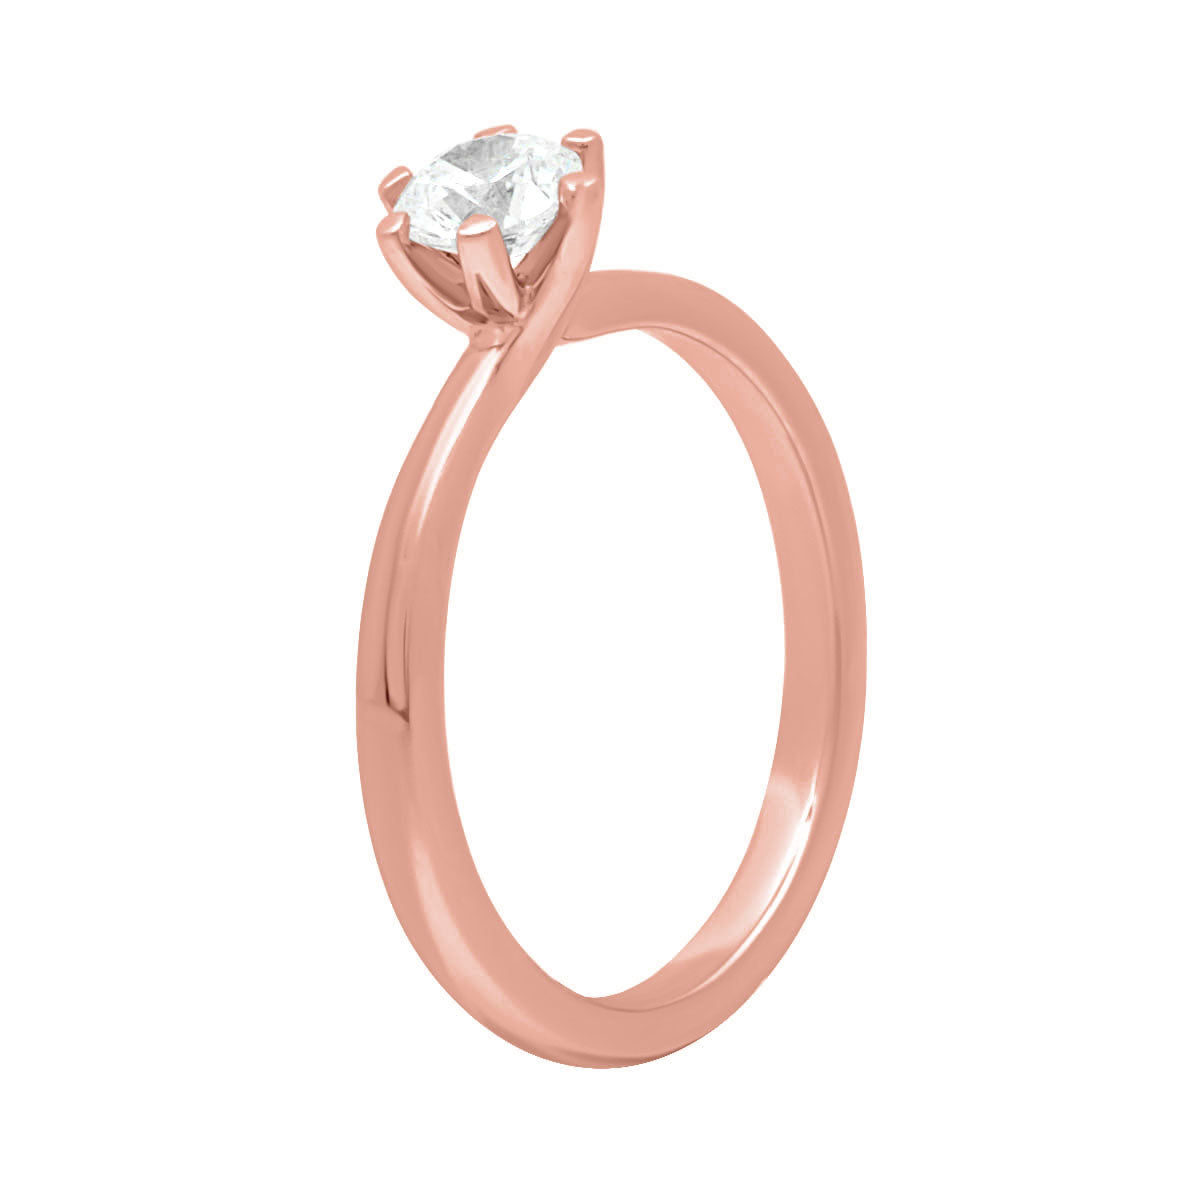 6 Claw solitaire Twist Ring in rose gold standing upright